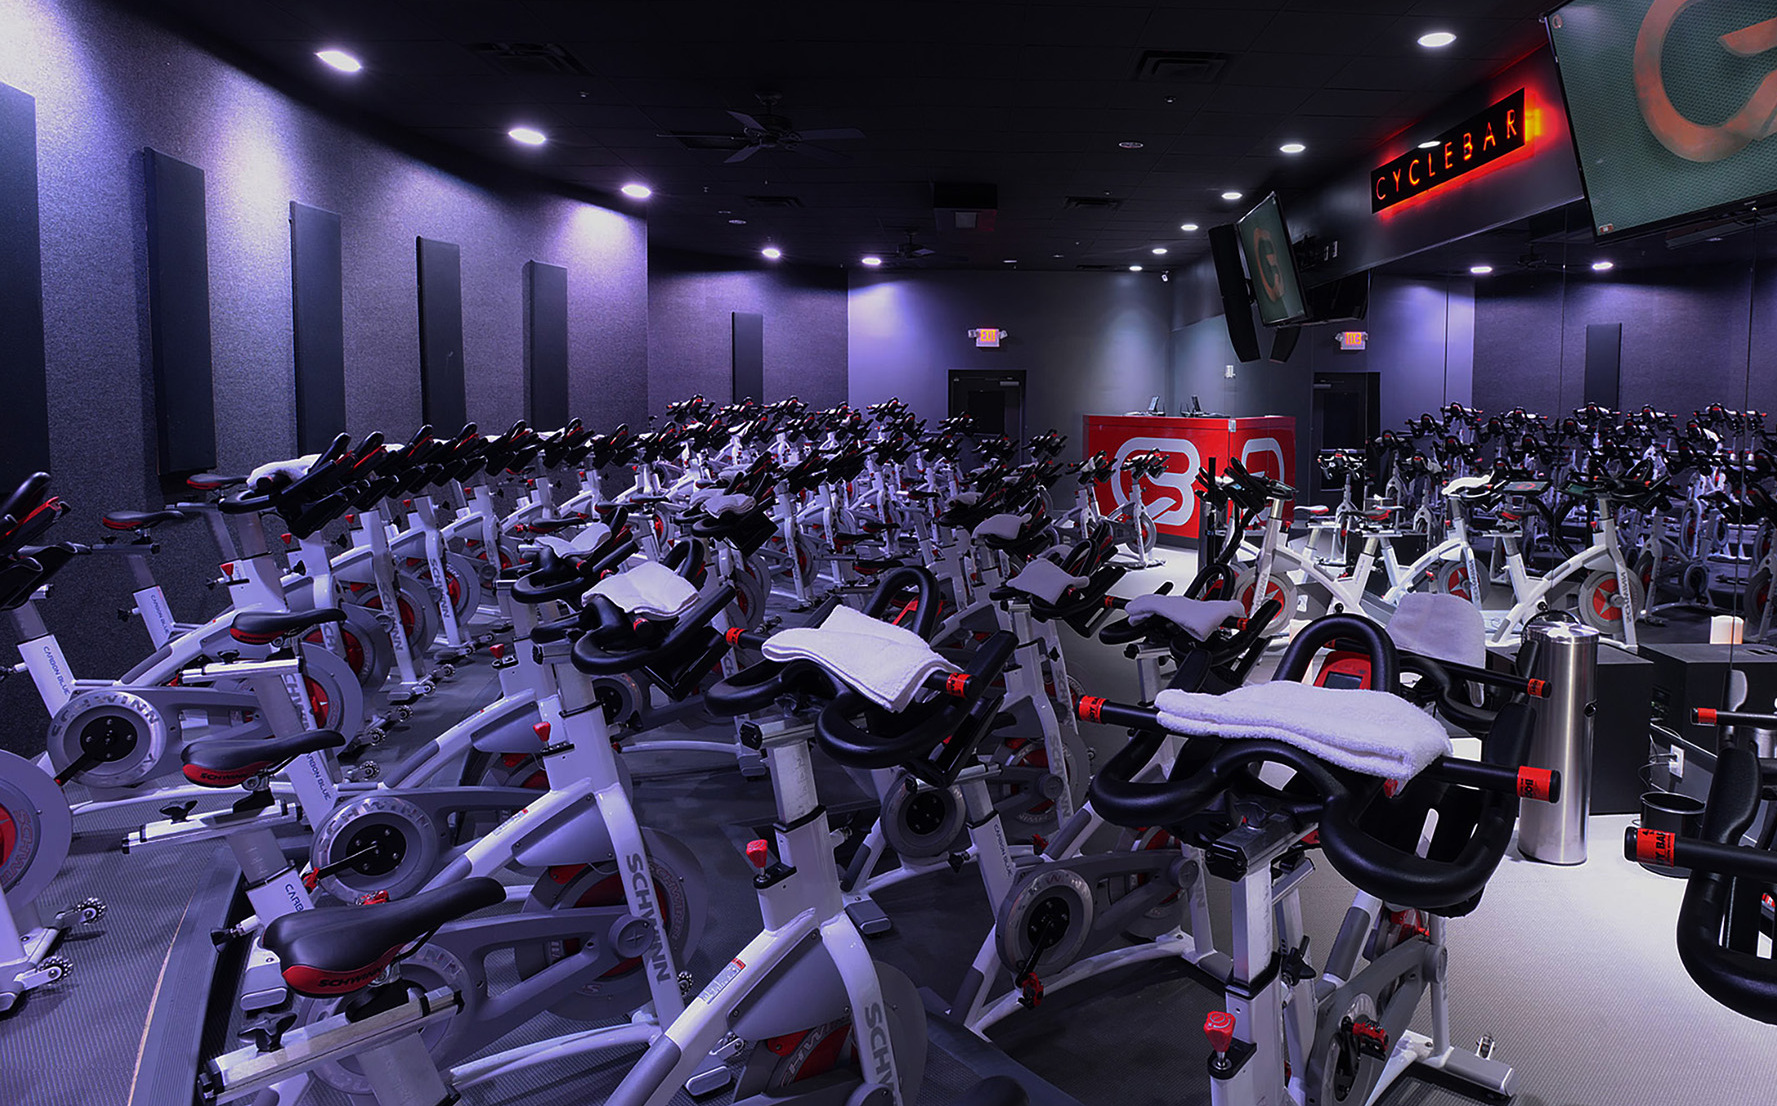 Our state-of-the-art Cycle Theatre CYCLEBAR Miamisburg (937)557-8225